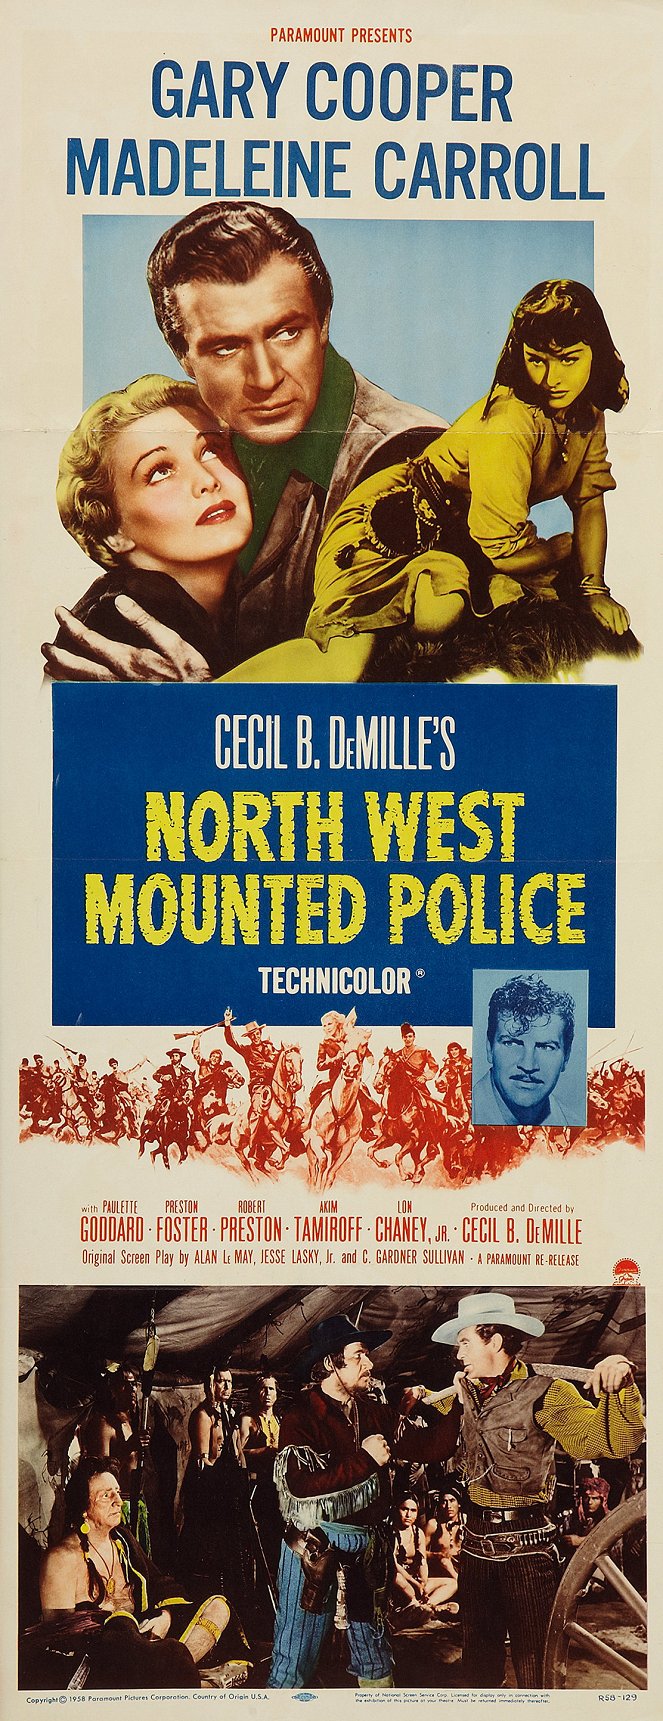 North West Mounted Police - Posters